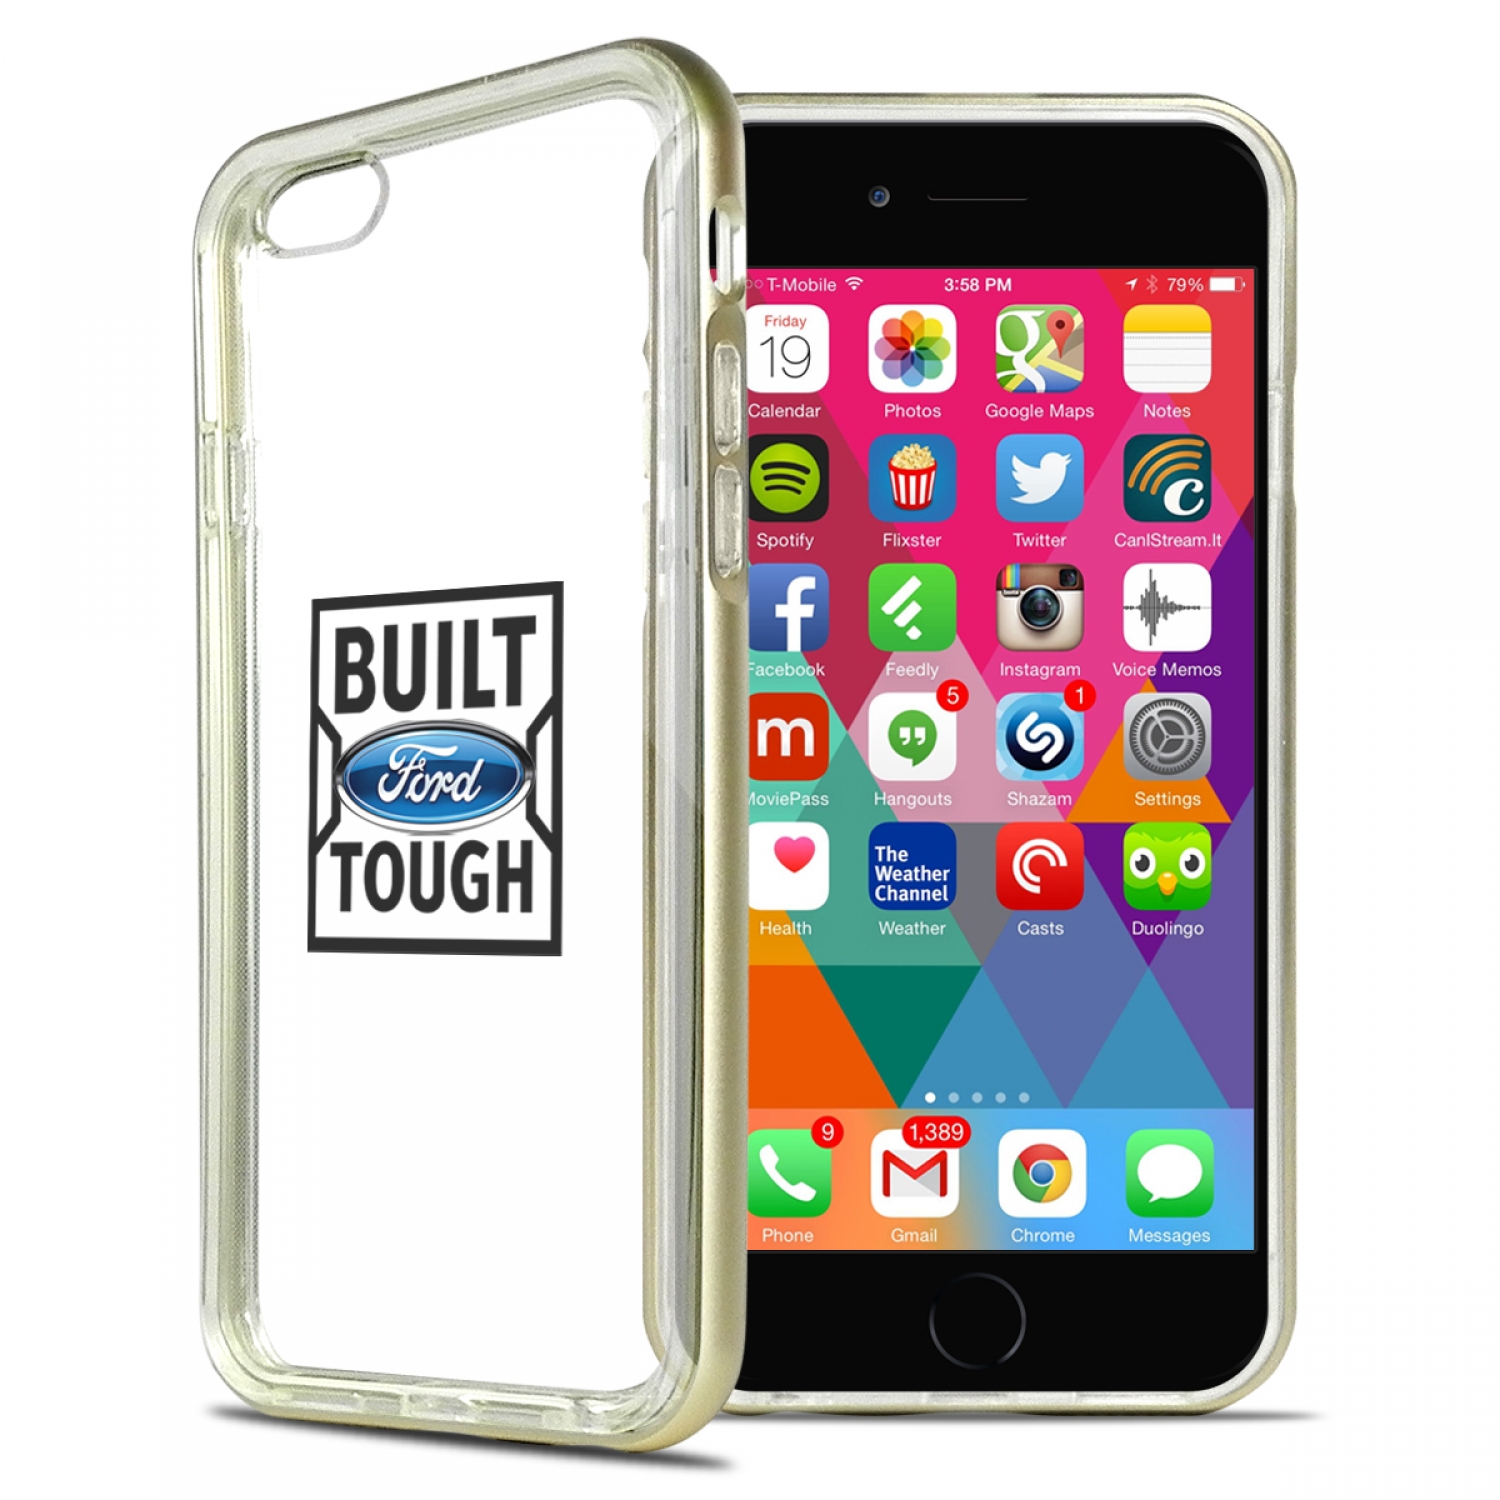 Ford Built Ford Tough iPhone 6 6s Shockproof Clear TPU Case with Gold Metal Bumper Hybrid Phone Case